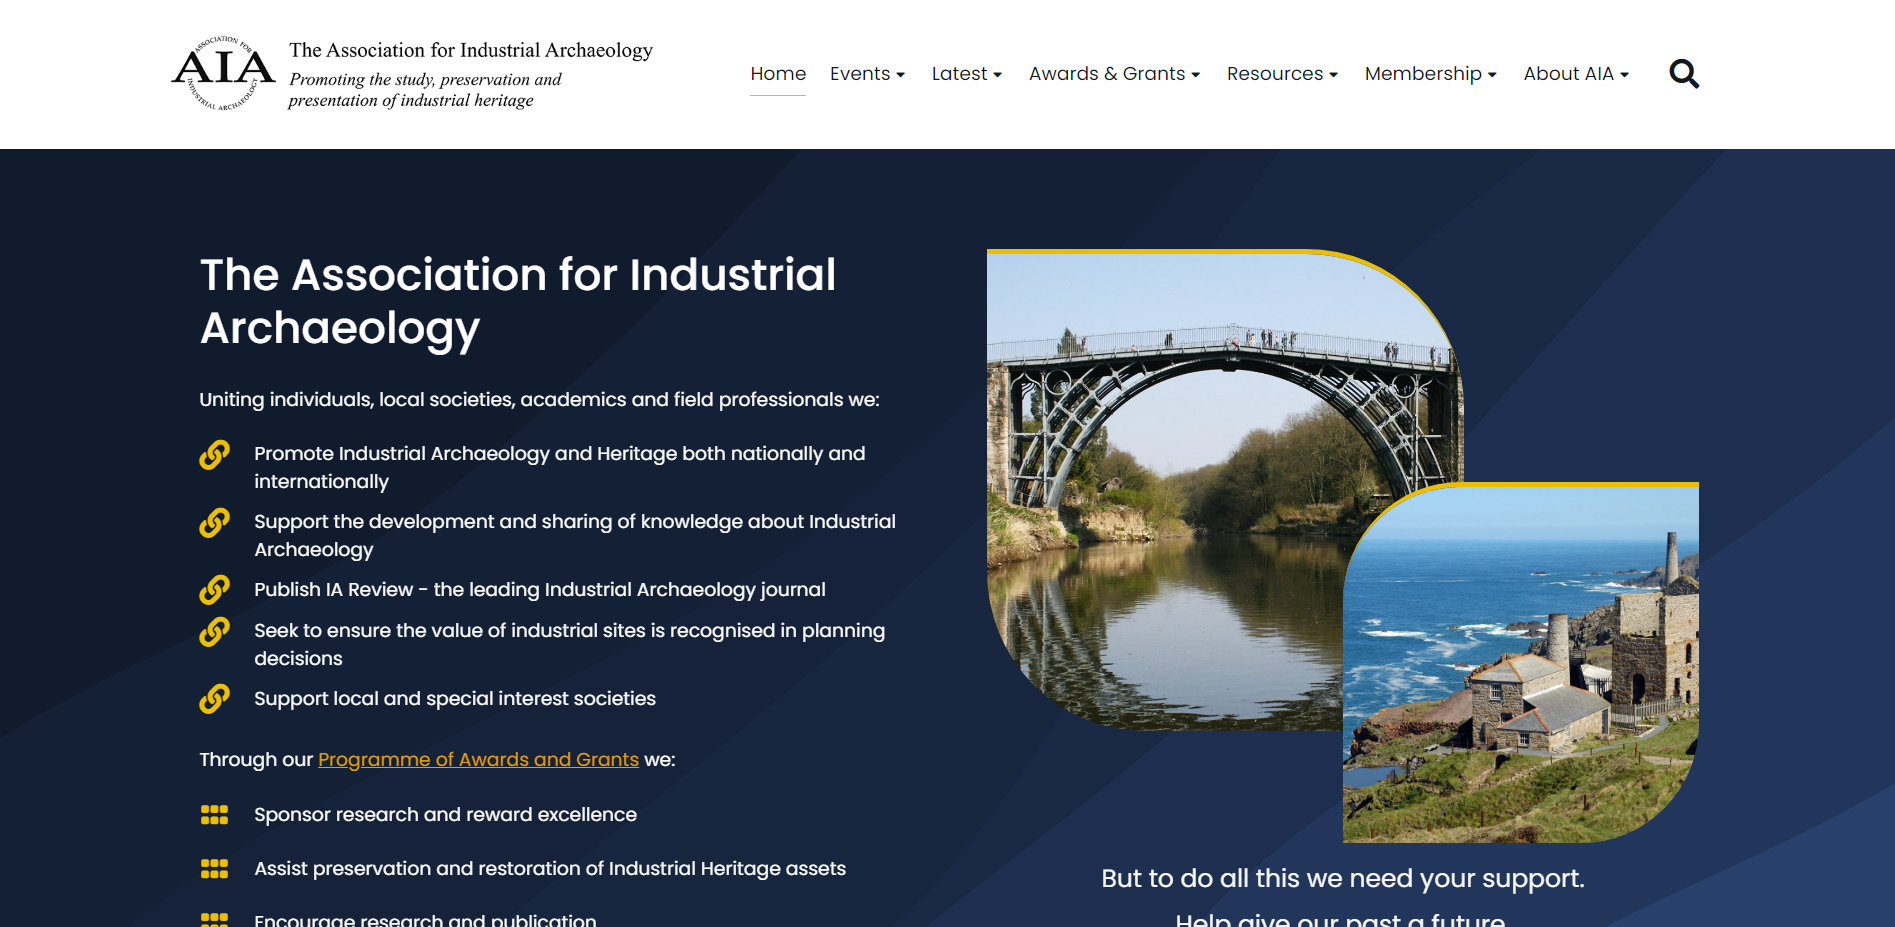 AIA; Association for Industrial Archaeology